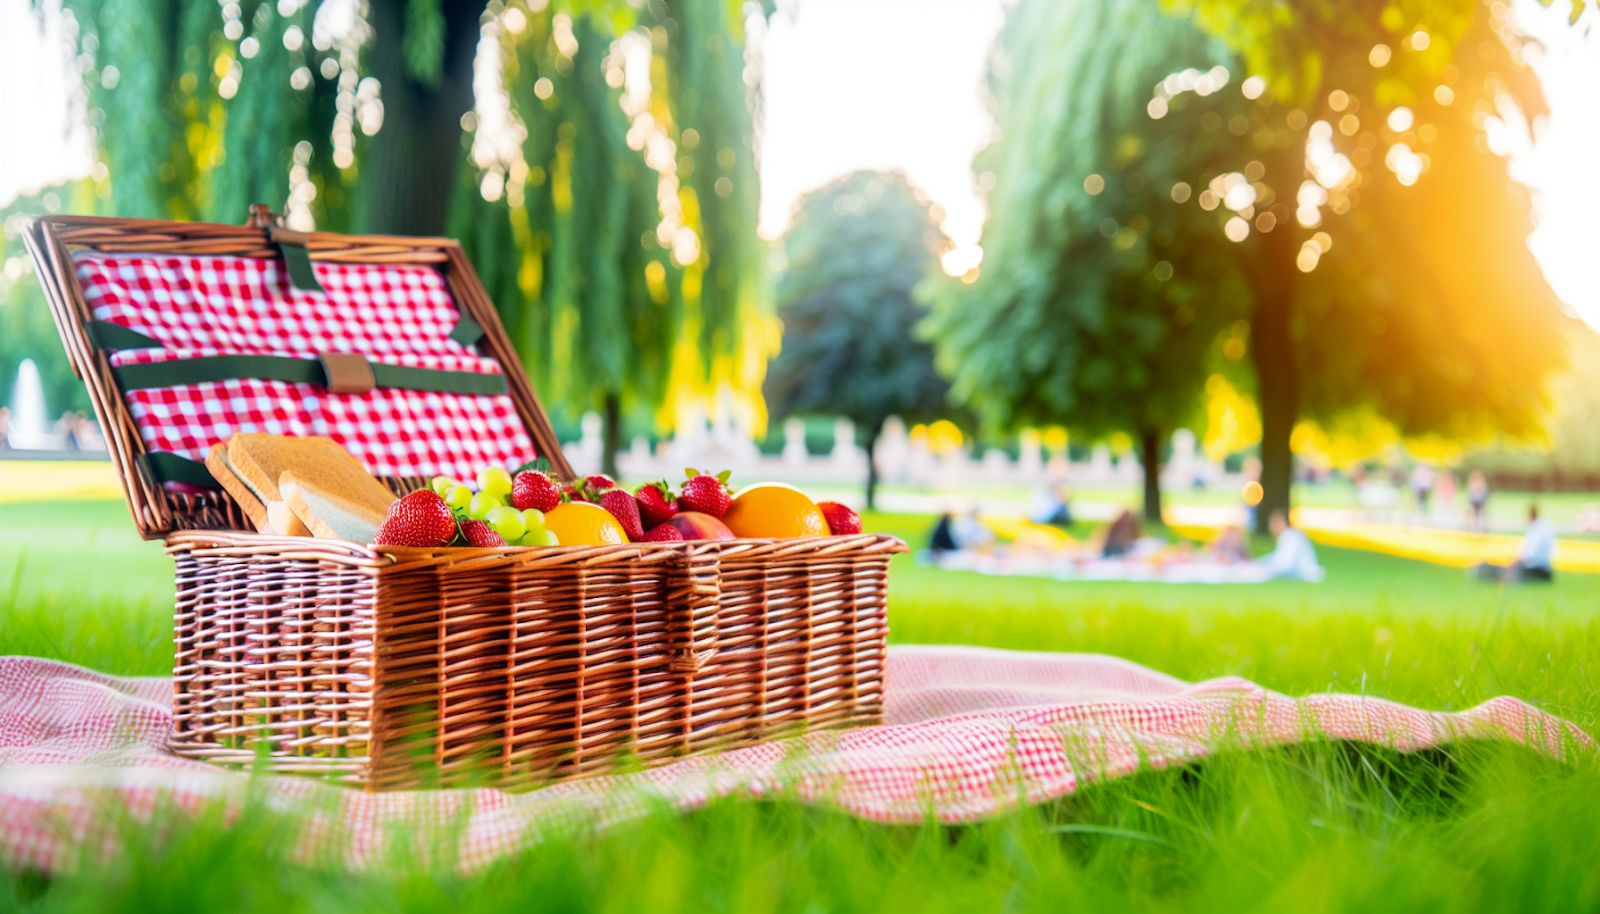 Picnic basket with fruits and sandwiches in the park